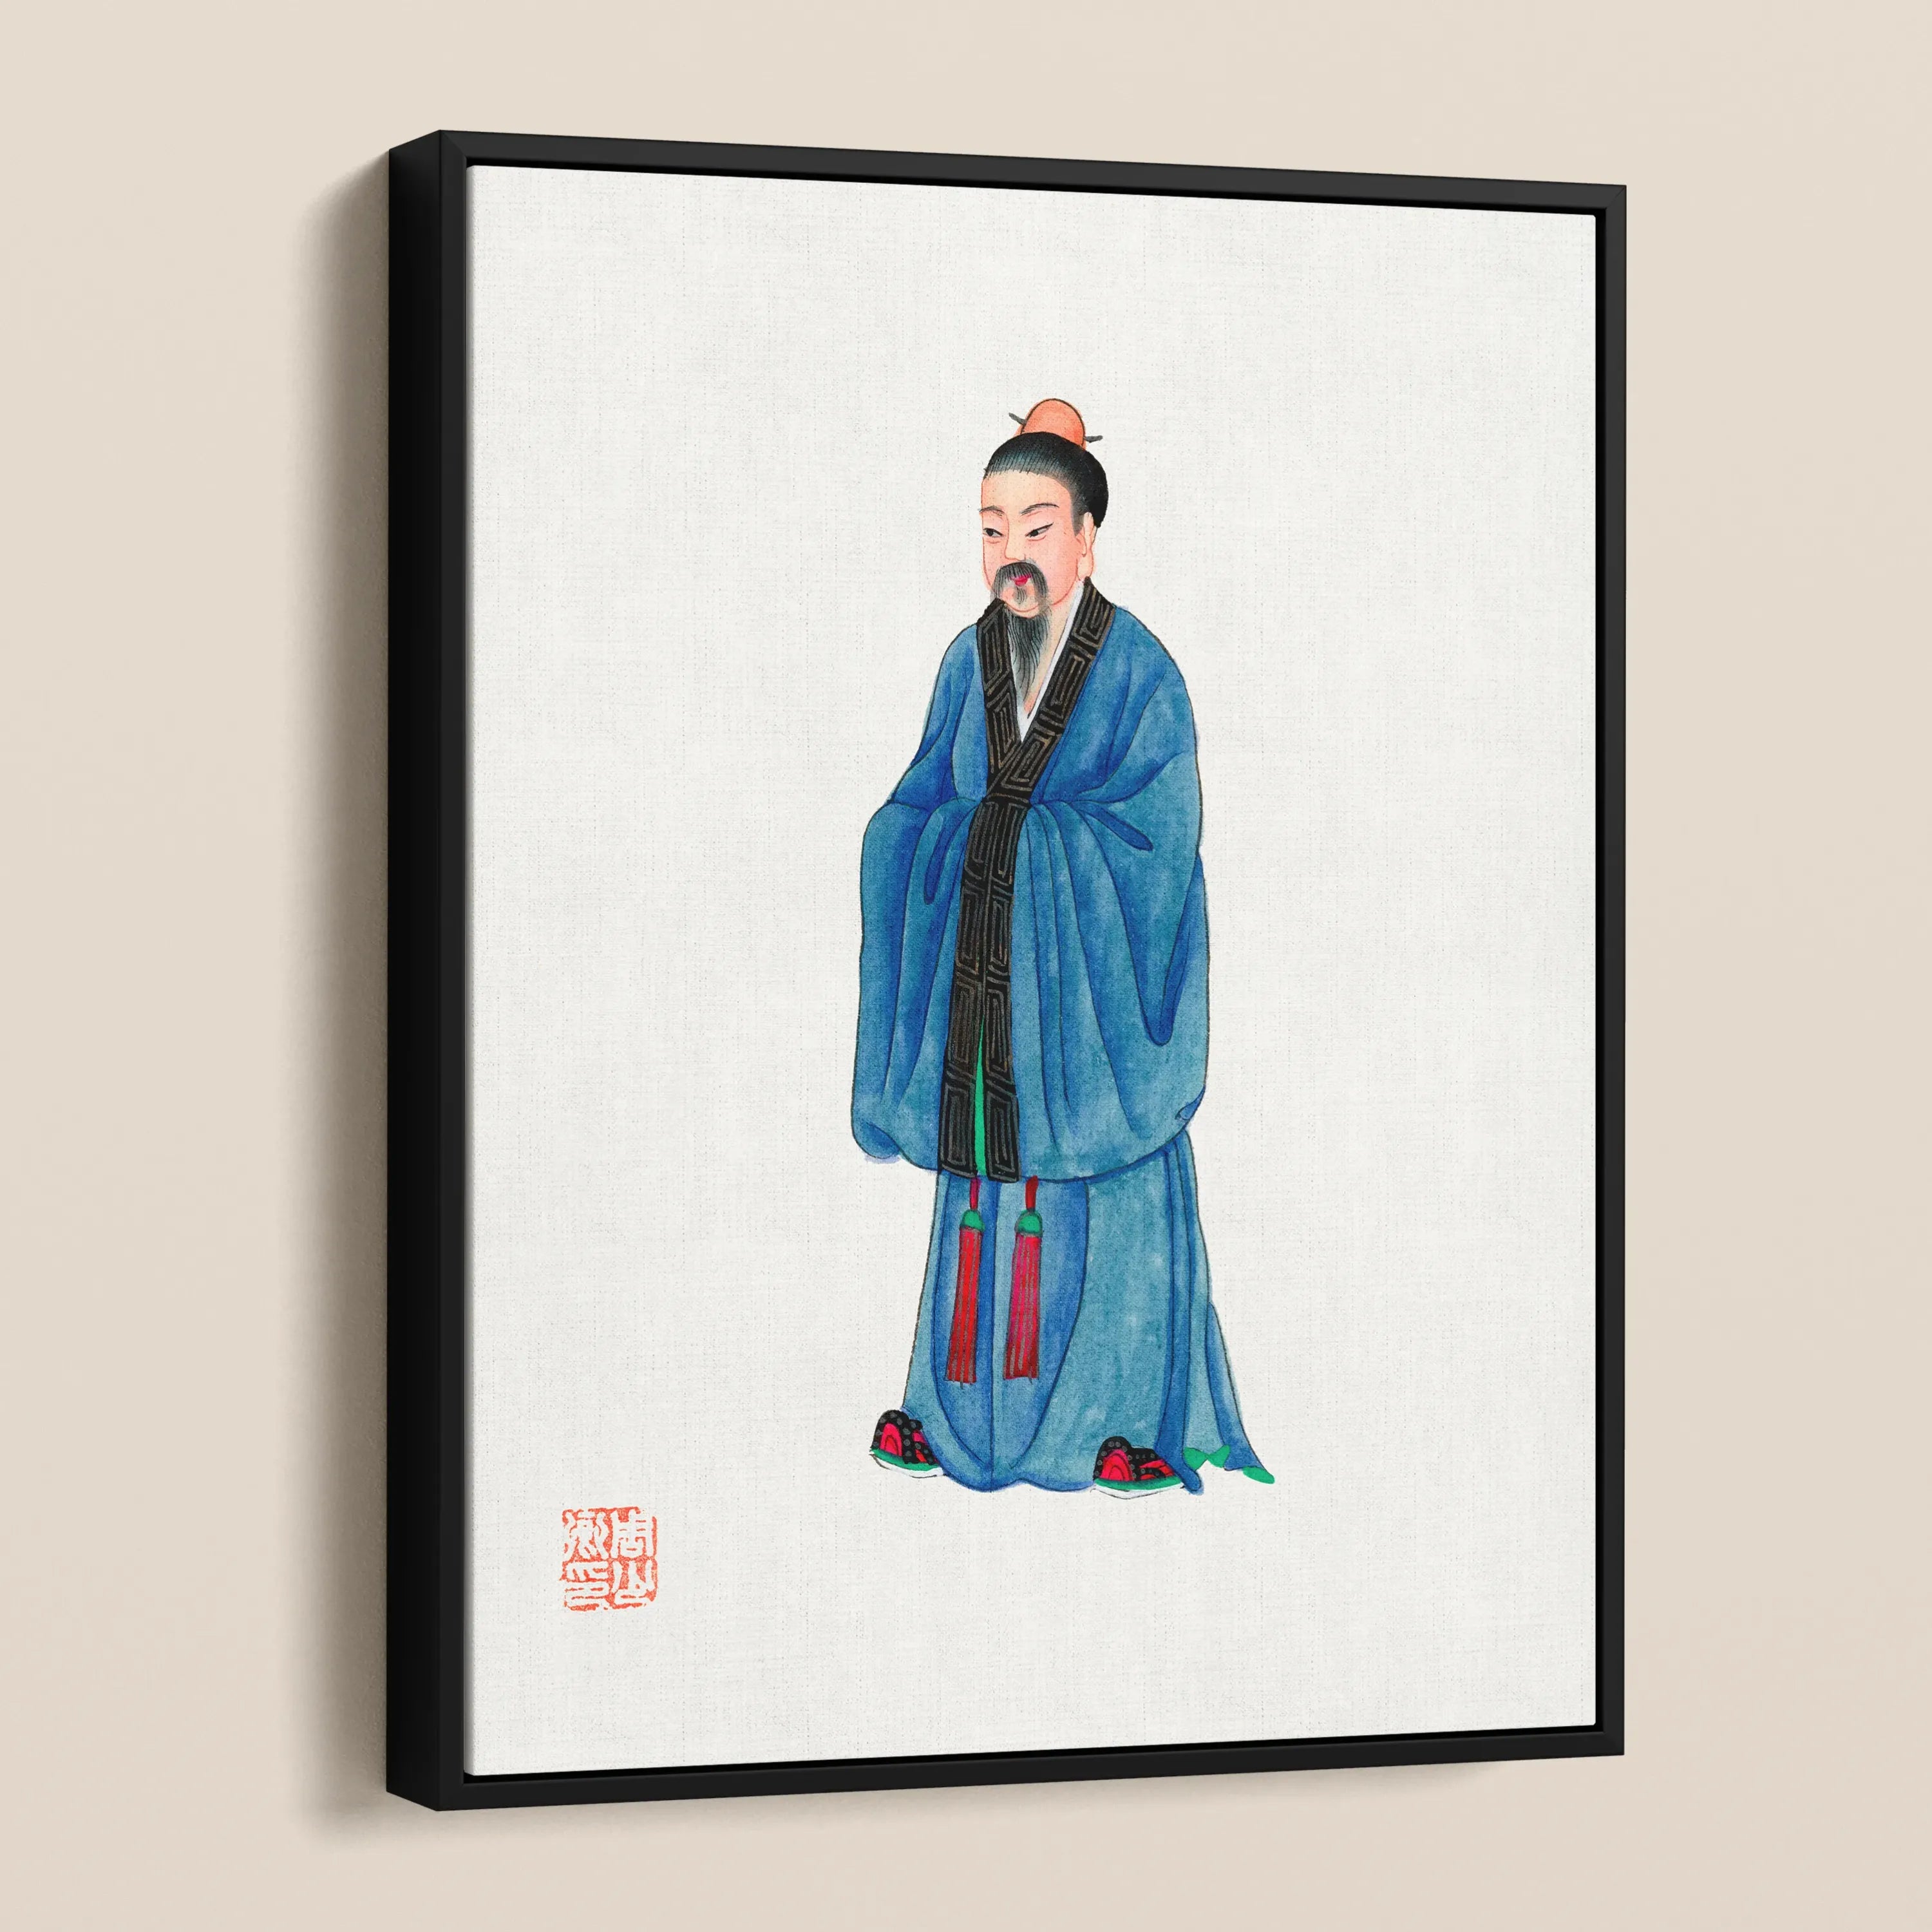 Chinese Master Framed Canvas - Posters Prints & Visual Artwork - Aesthetic Art